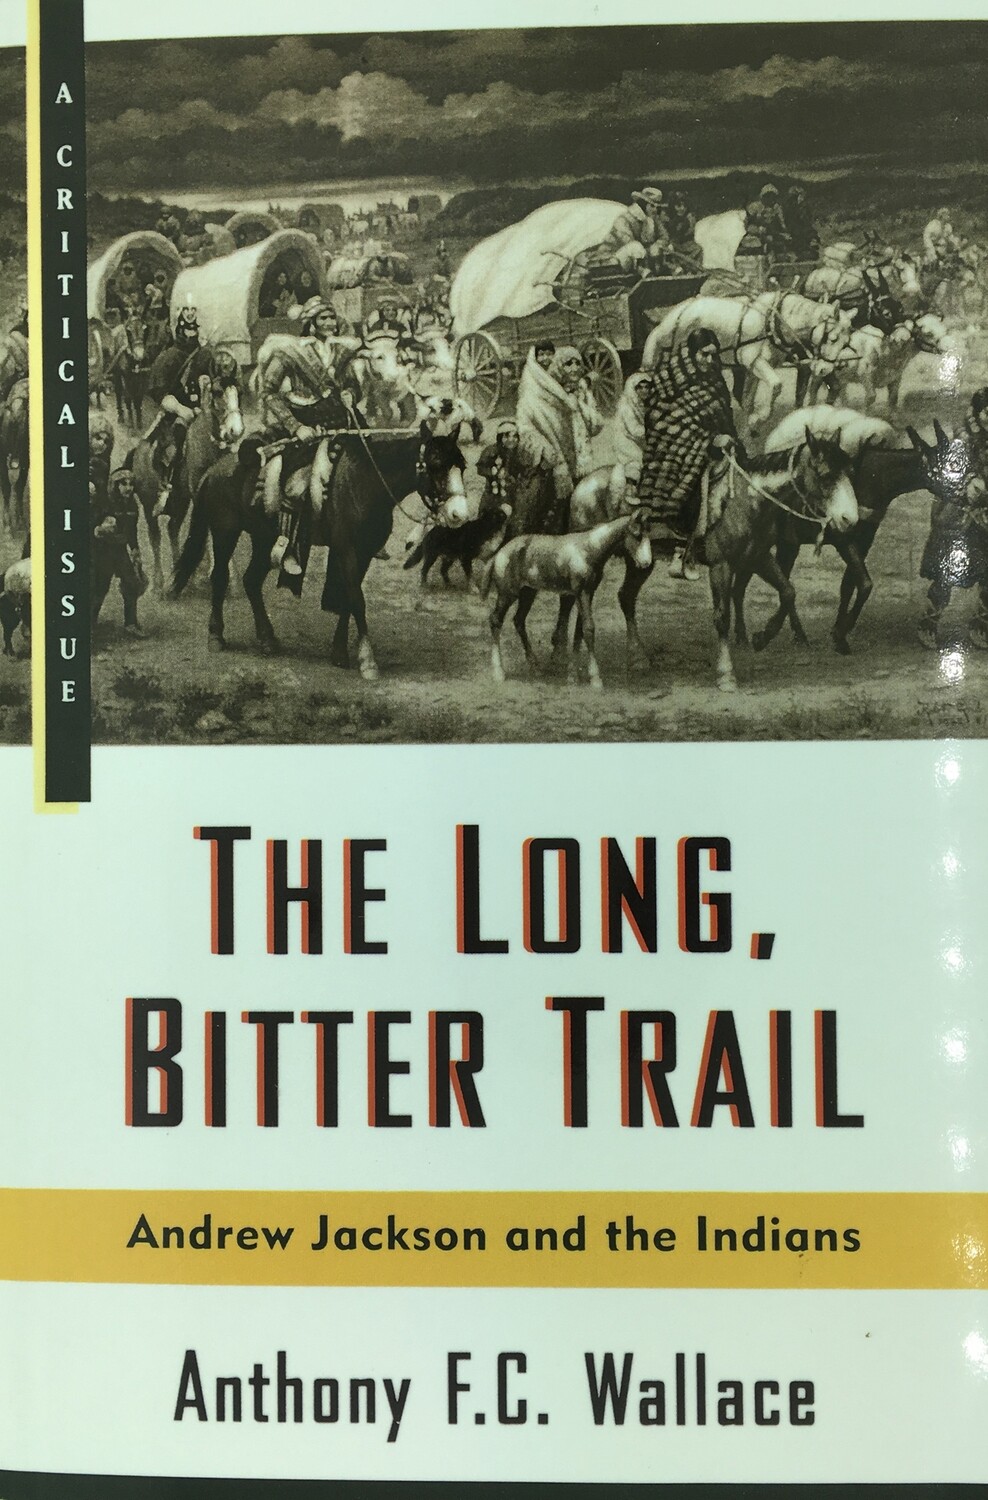 The Long, Bitter Trail